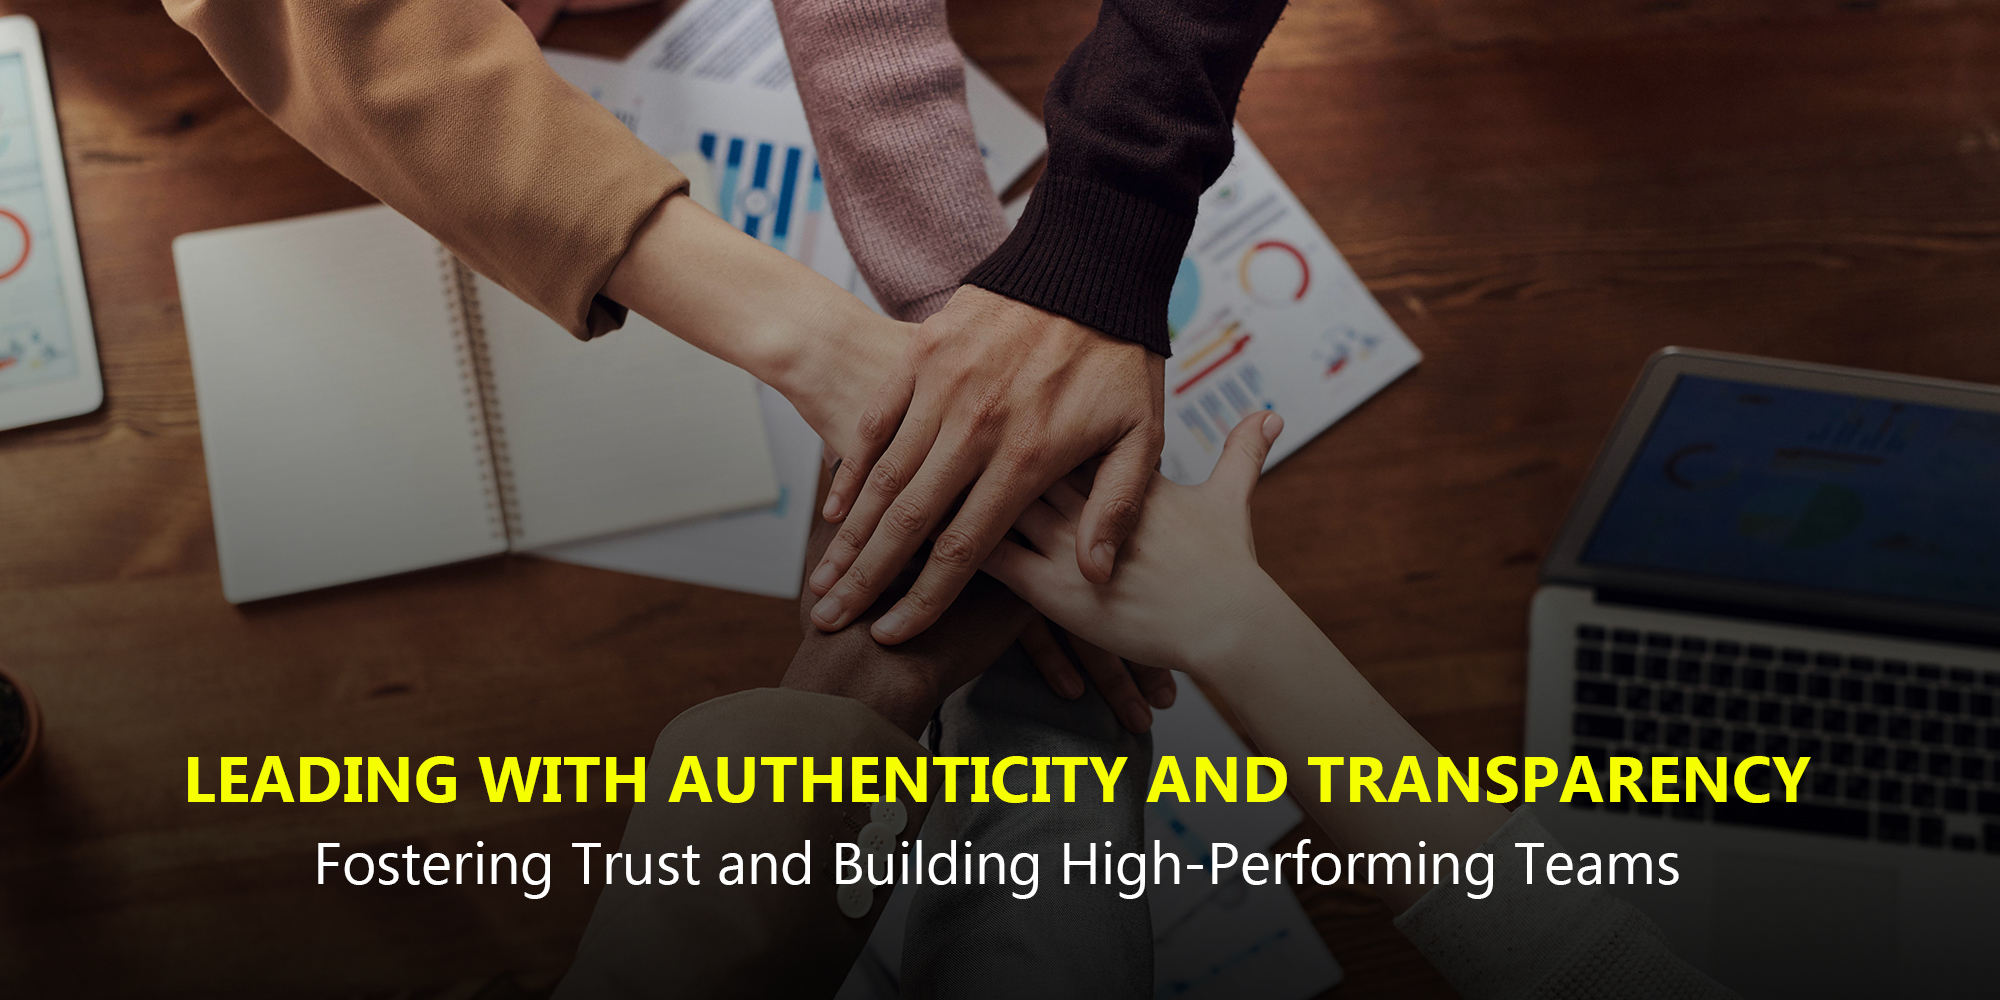 Leading with Authenticity and Transparency: Fostering Trust and Building High-Performing Teams